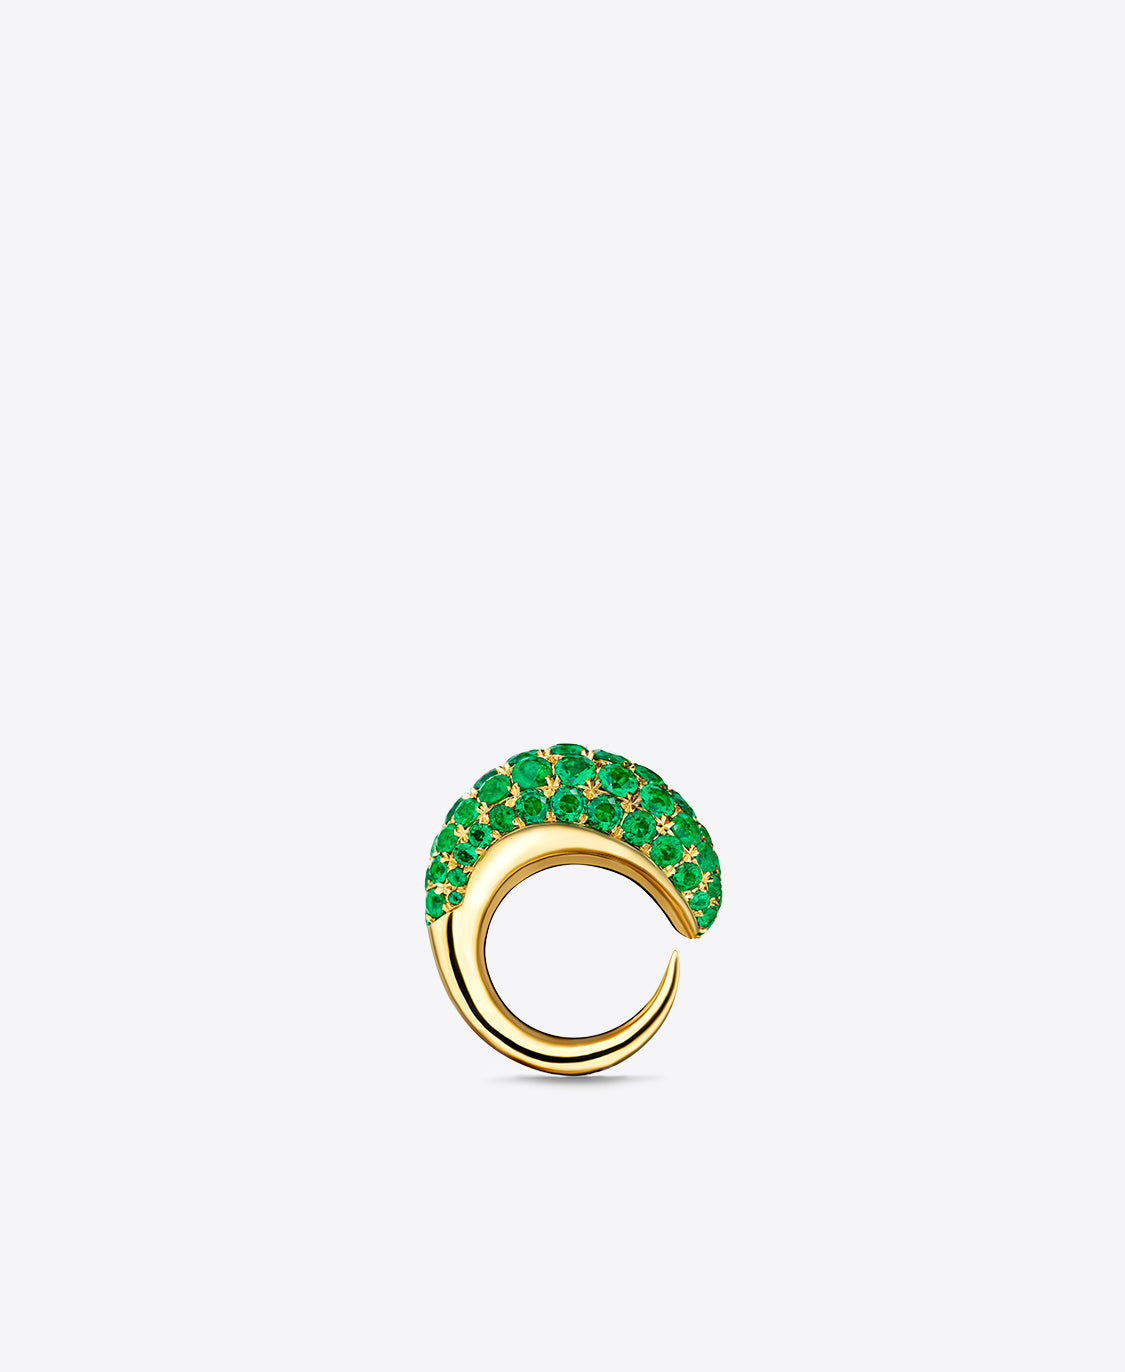 Khartoum II Ring in 18k Gold with Graduated Emeralds